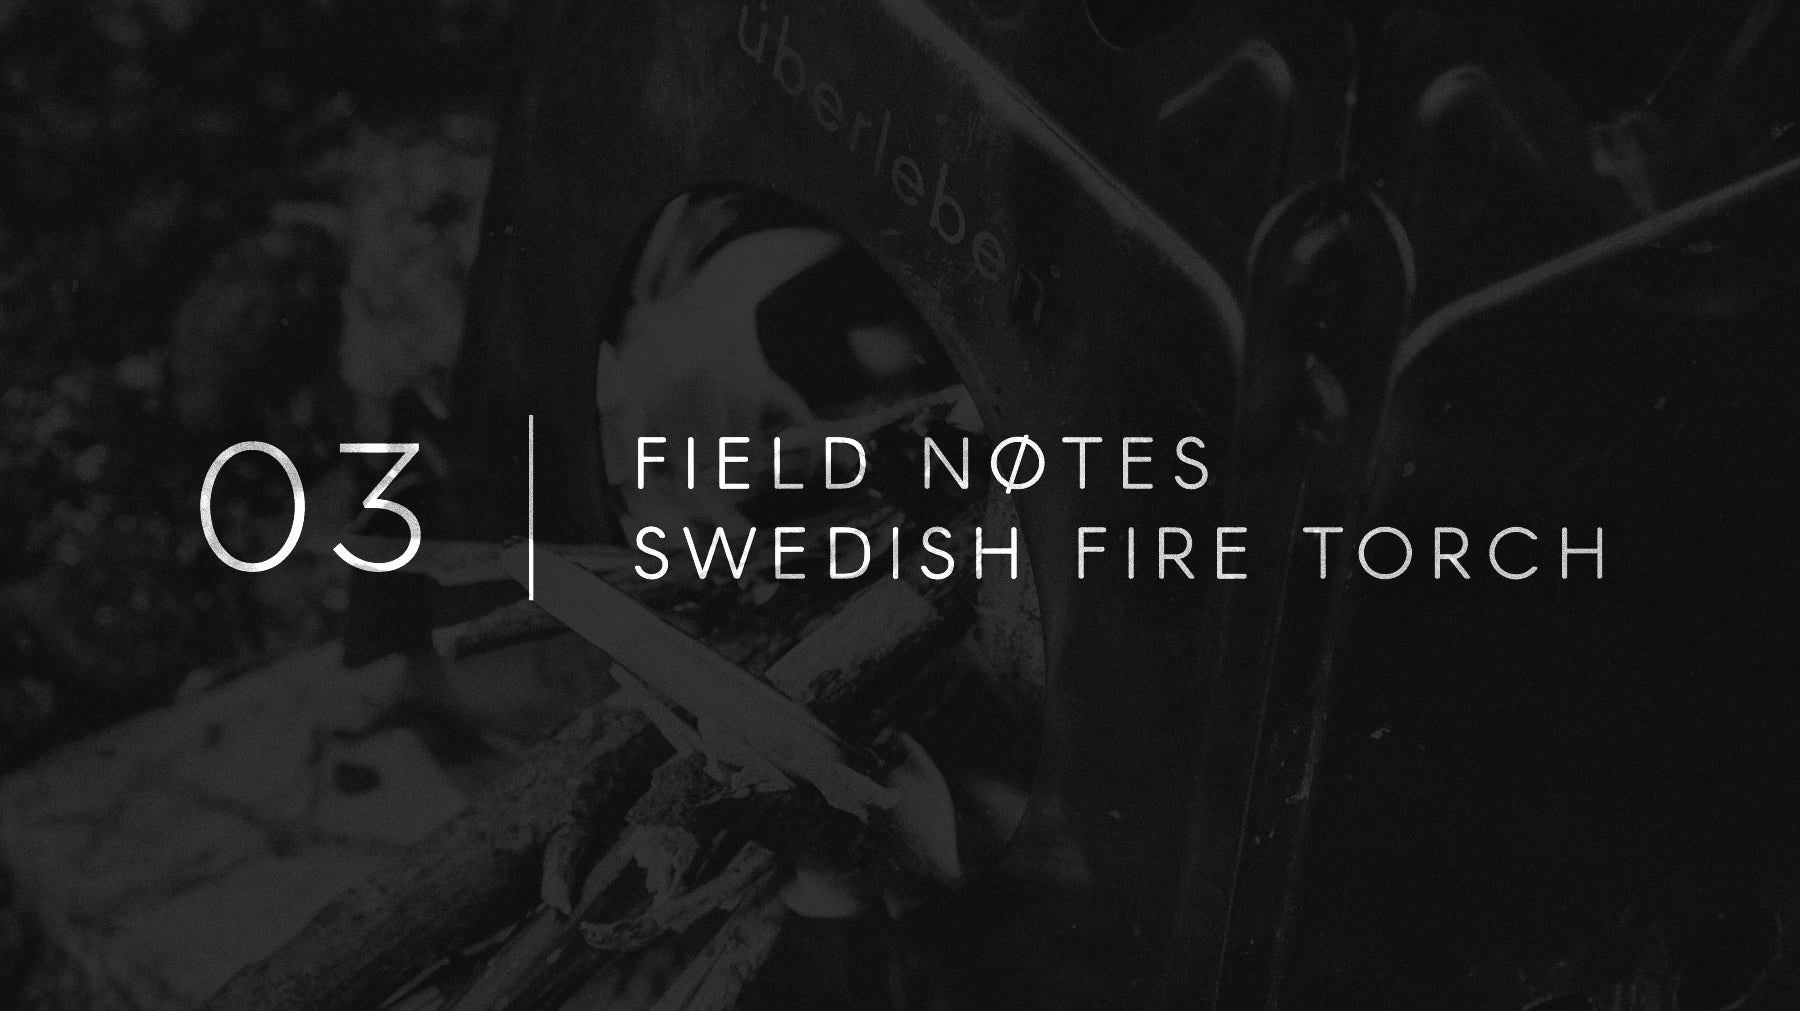 Field Notes 03 - Swedish Fire Torch